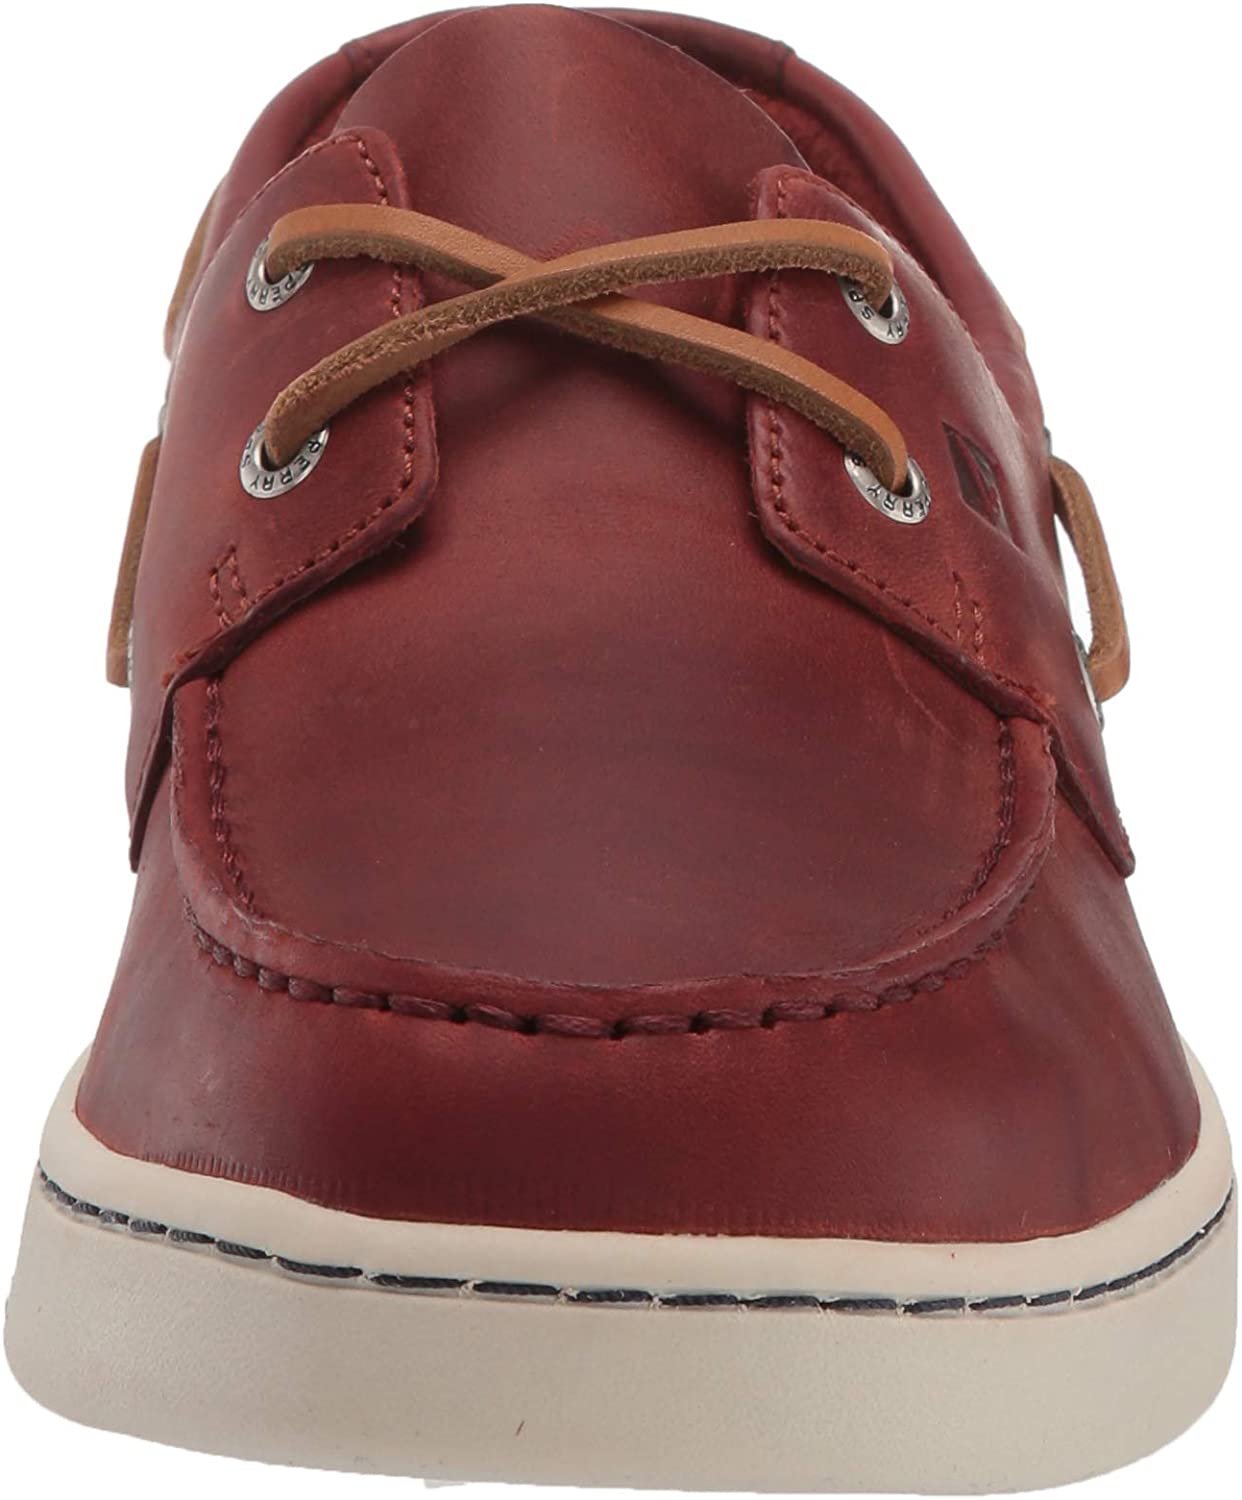 Sperry Men&#39;s Shoes Cup 2-eye Leather Closed Toe Boat Shoes, Burgundy, Size 11.0 | eBay